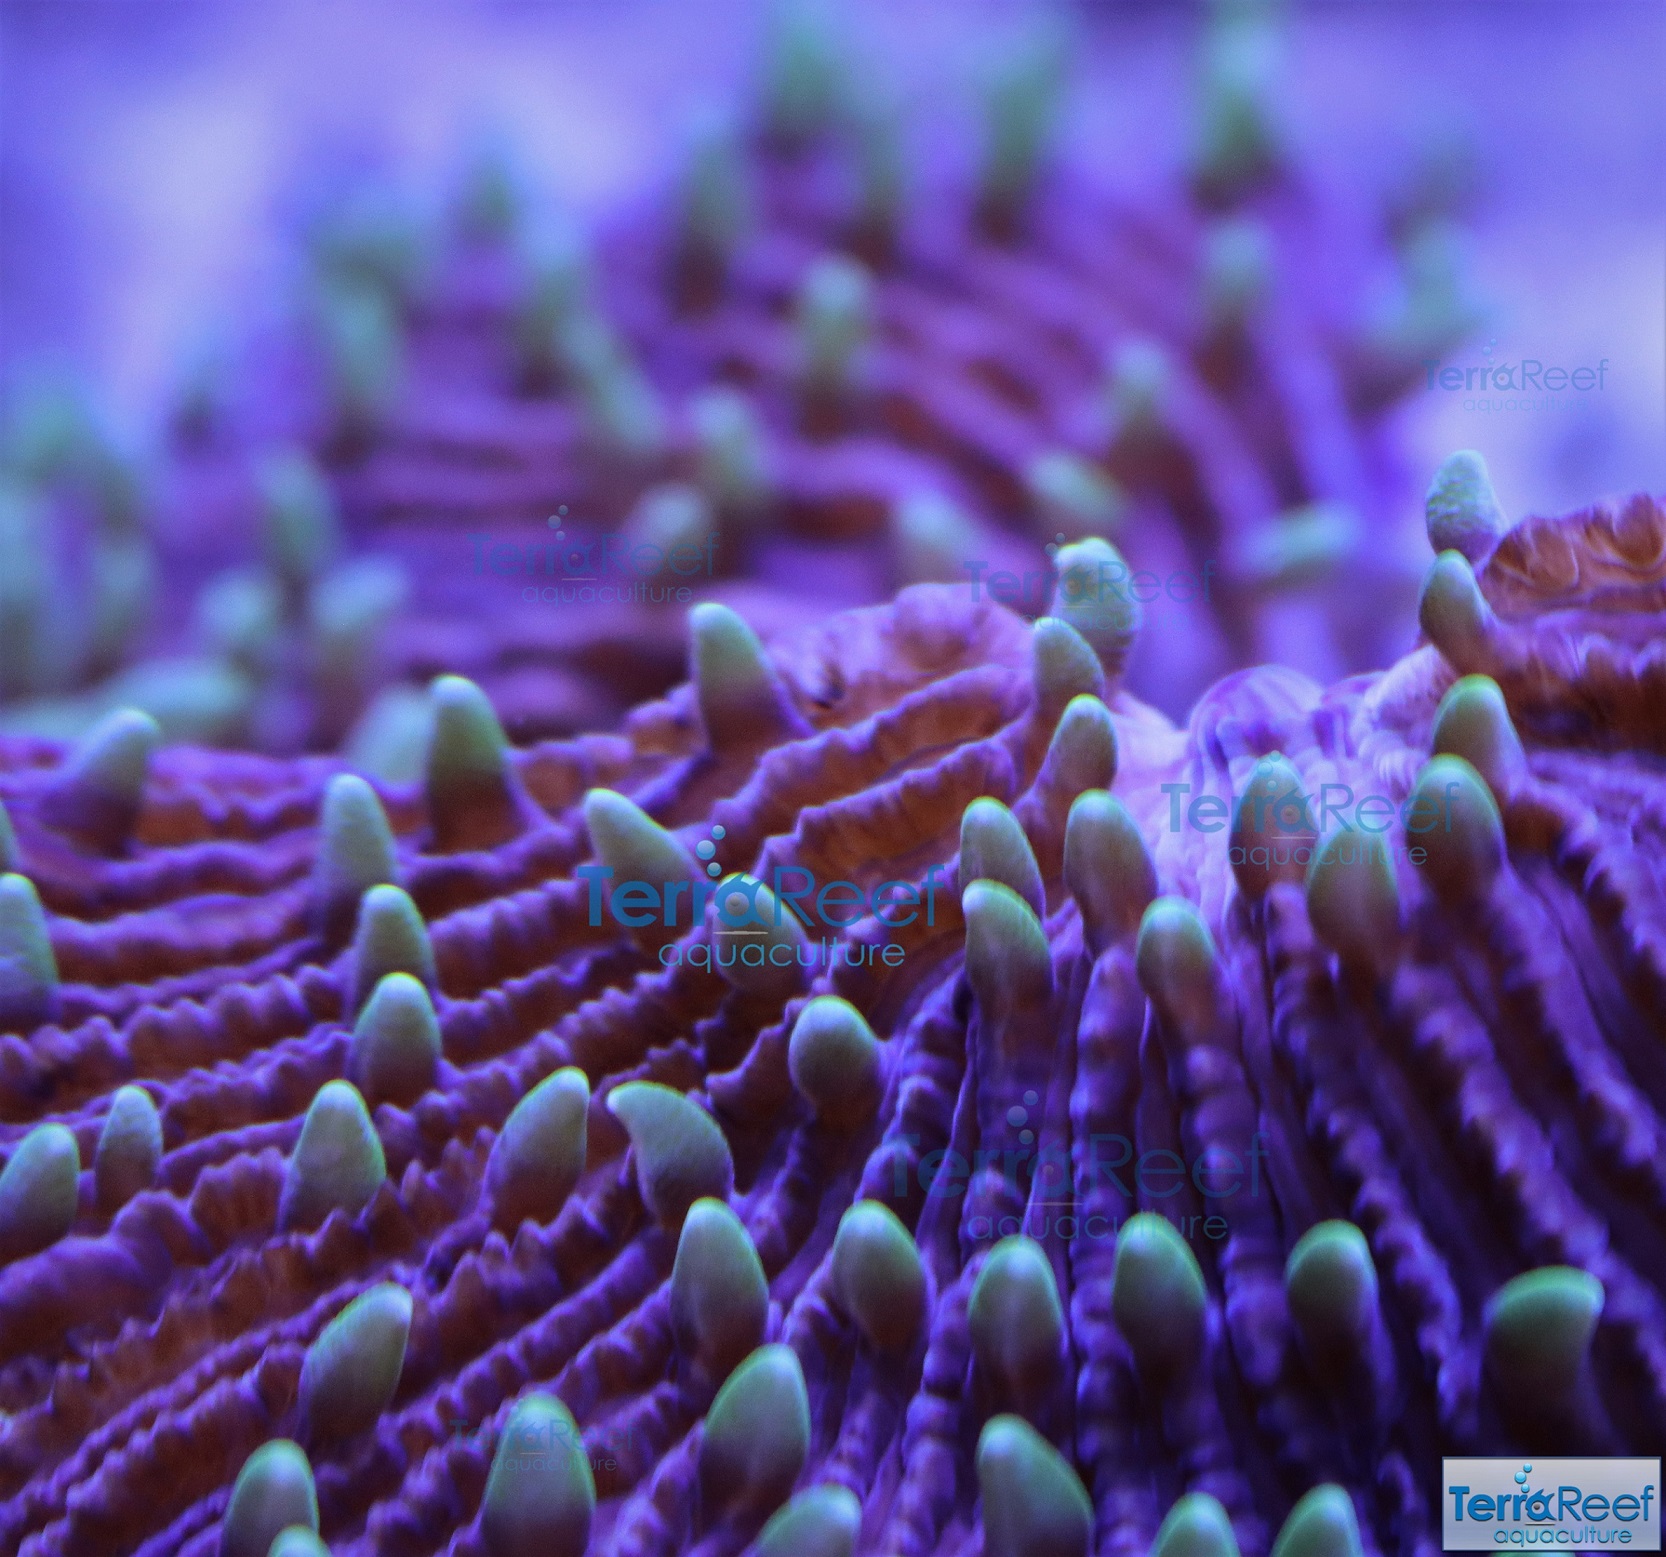 IMG_3387-Fungia-Plate-Coral-Small.jpg